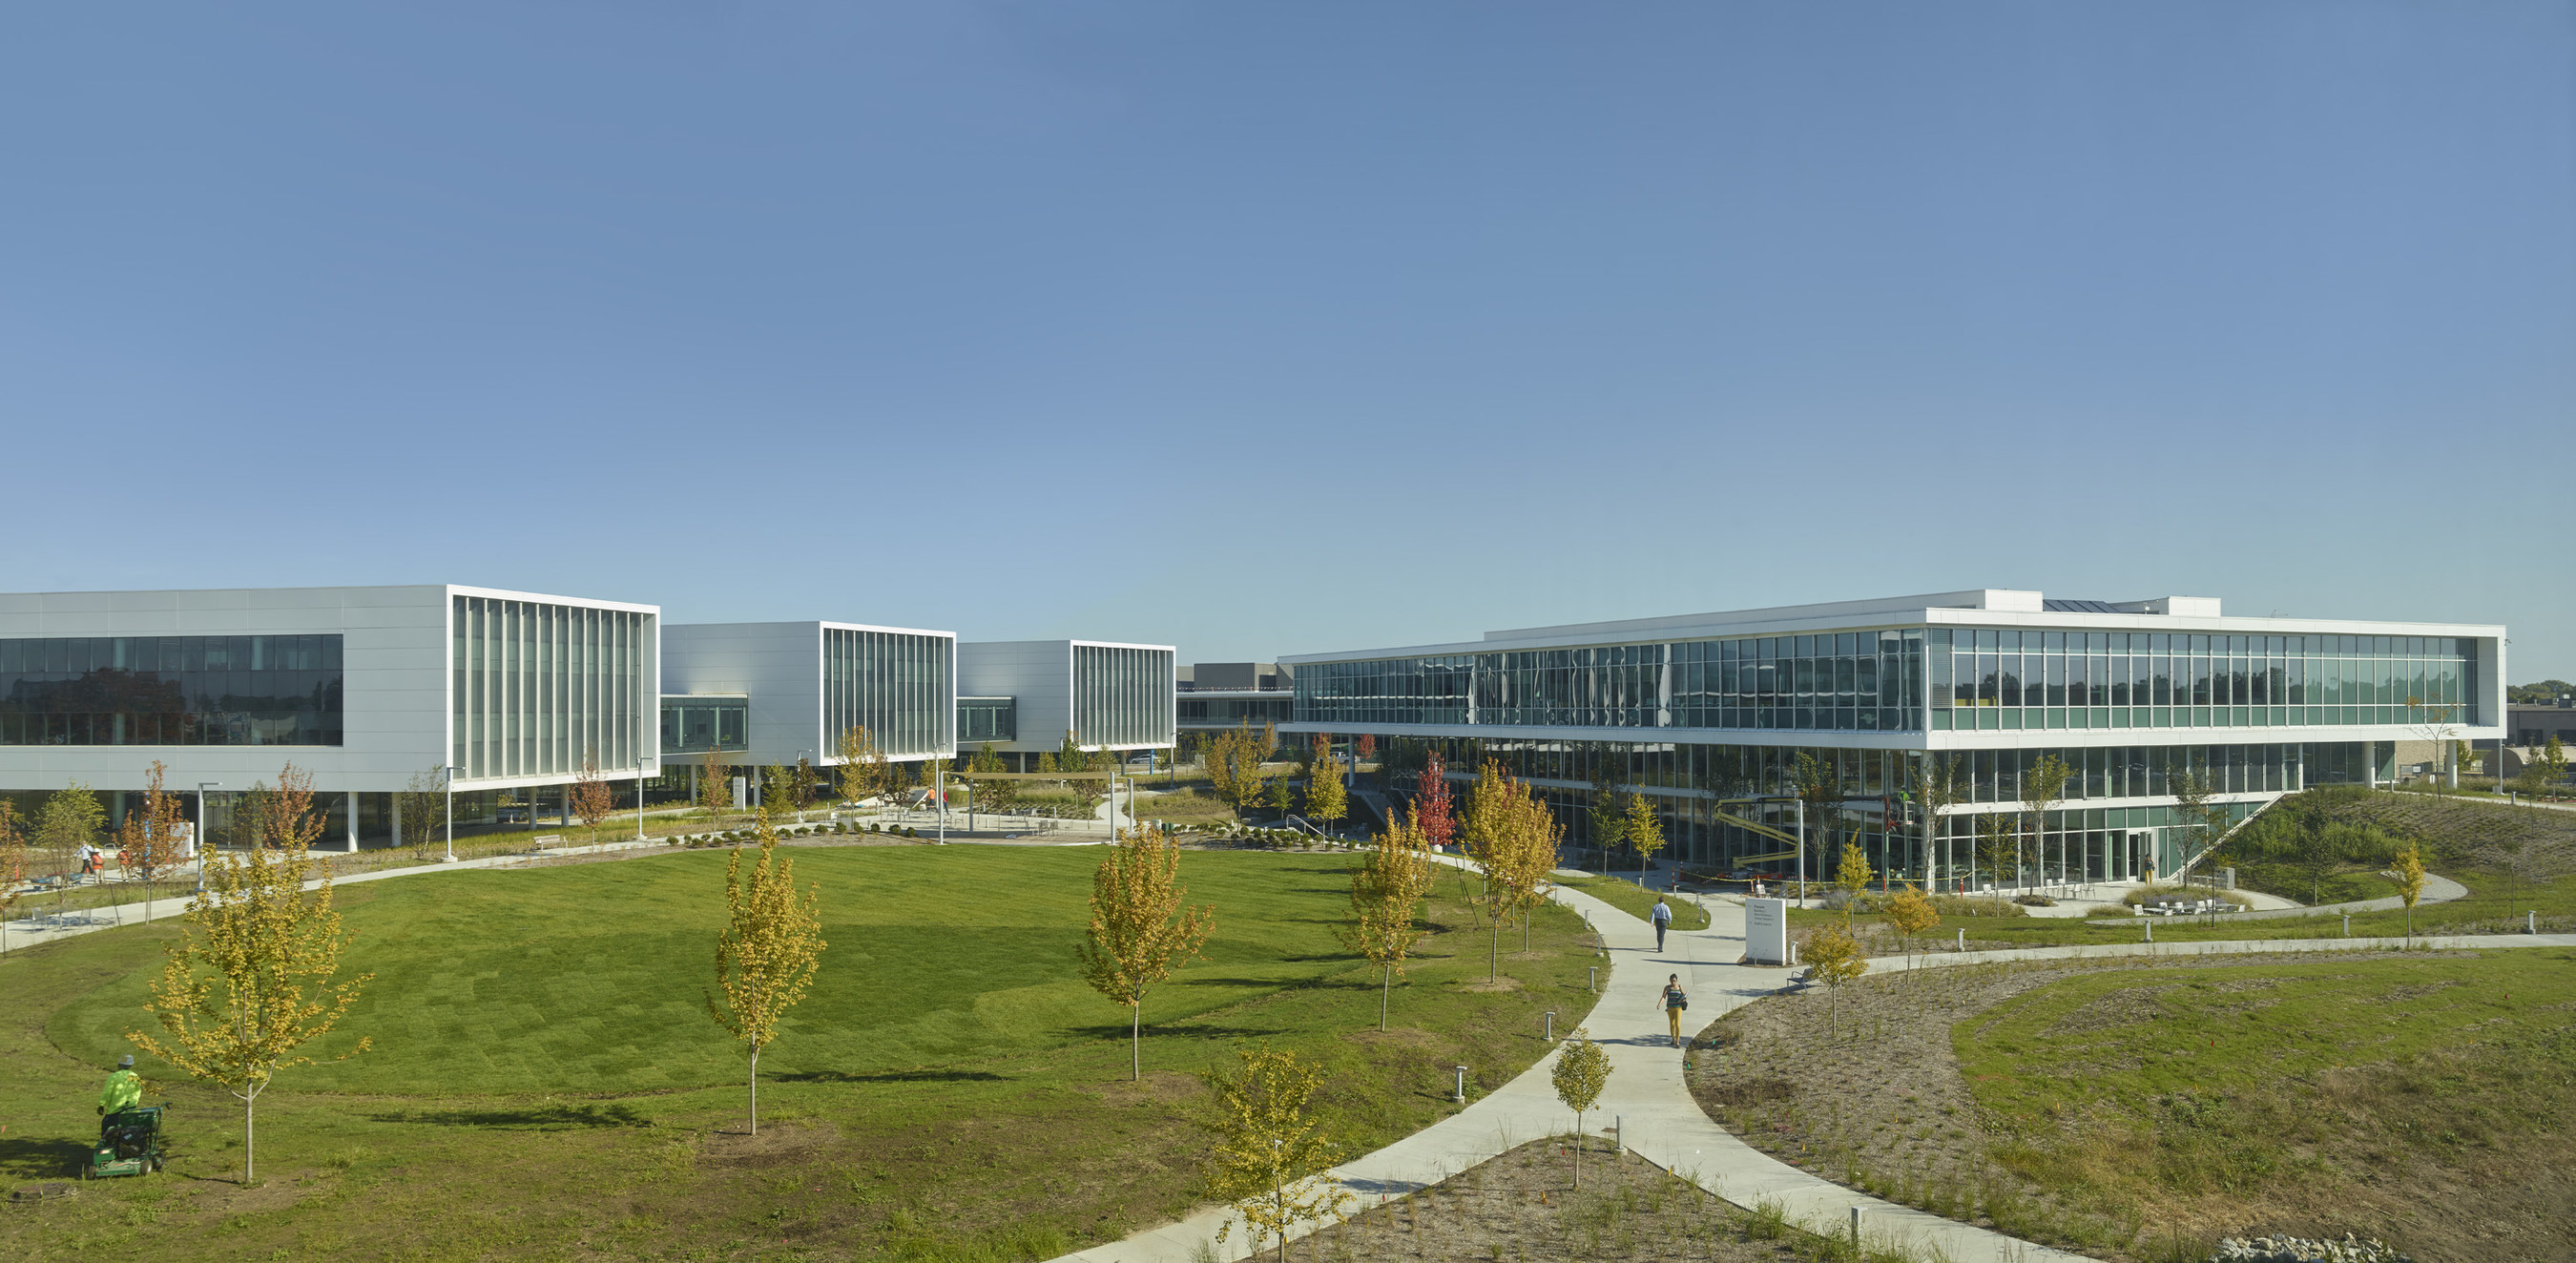 Swiss-based Roche Diagnostics announced that it has completed the first phase of the $300 million site transformation at its North American headquarters location in Indianapolis. The first phase includes five new buildings, refurbishing of existing buildings, IT infrastructure upgrades and investments in manufacturing technology.